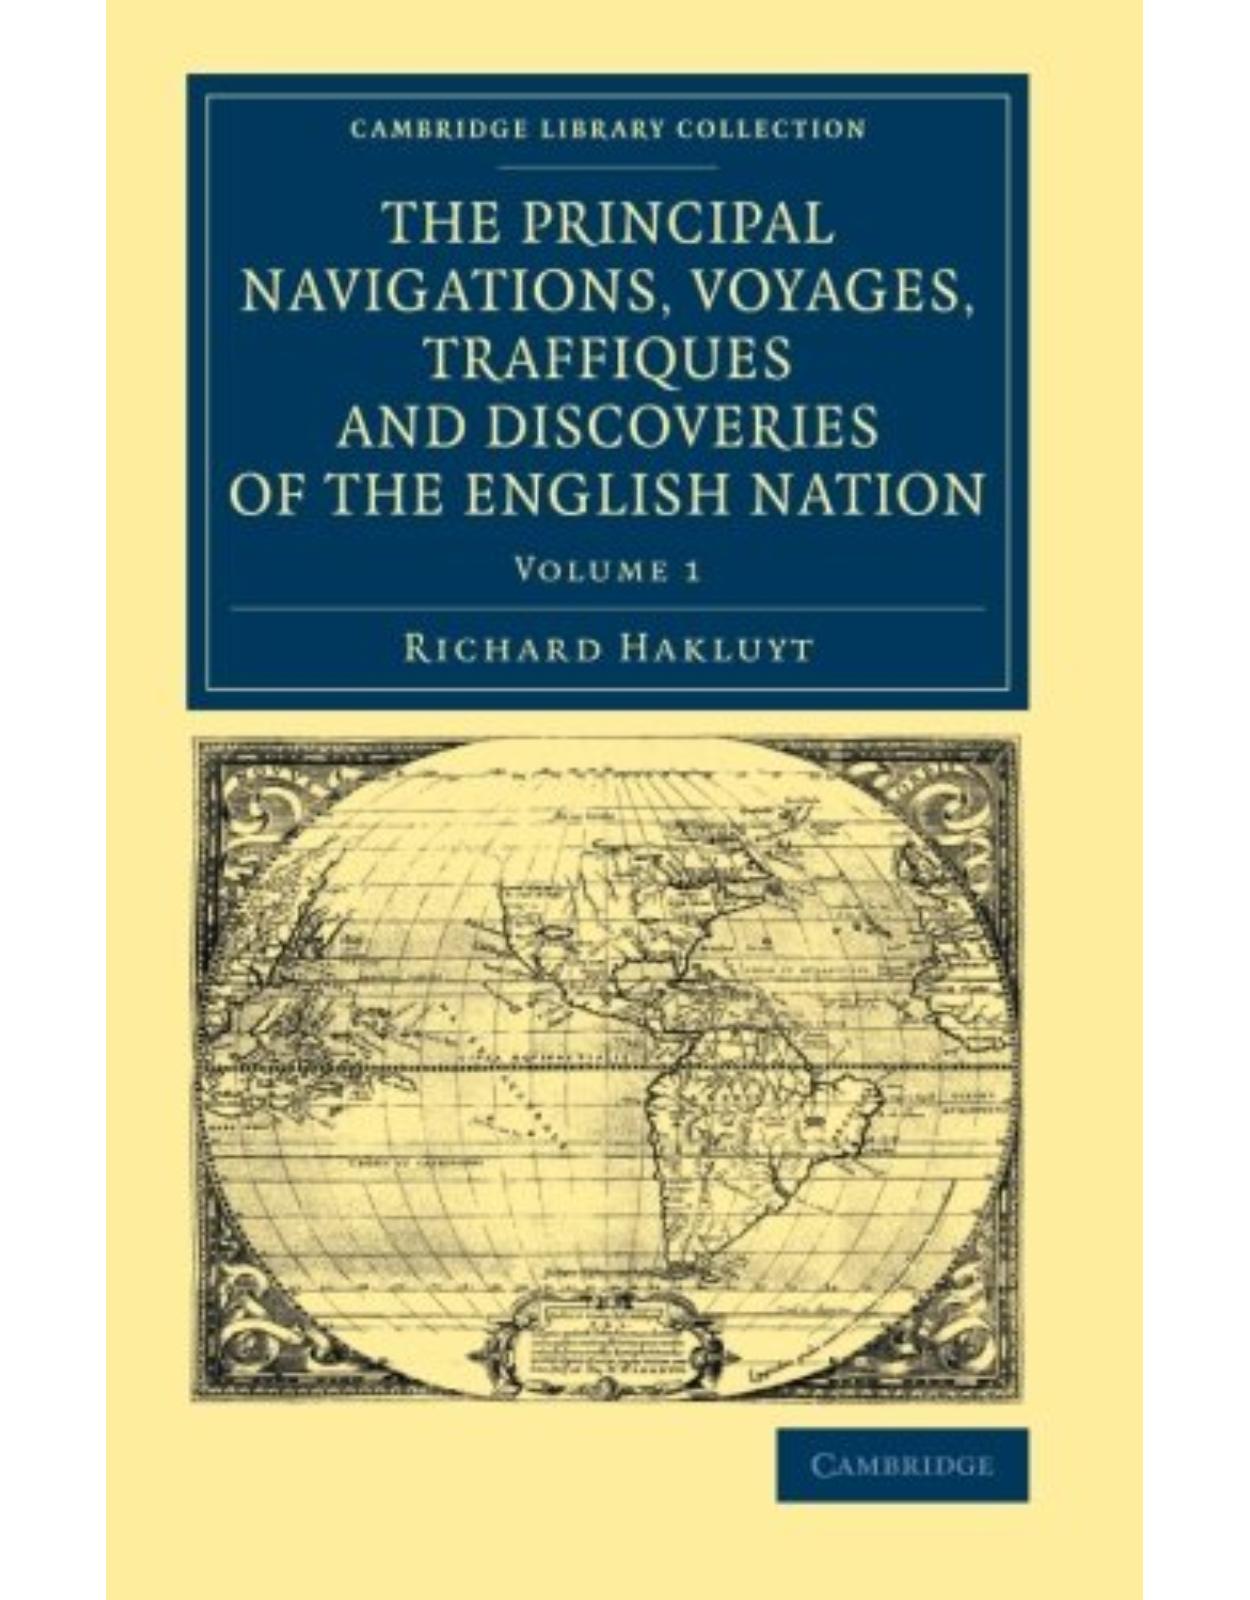 The Principal Navigations Voyages Traffiques and Discoveries of the English Nation: Volume 1 (Cambridge Library Collection - Maritime Exploration)